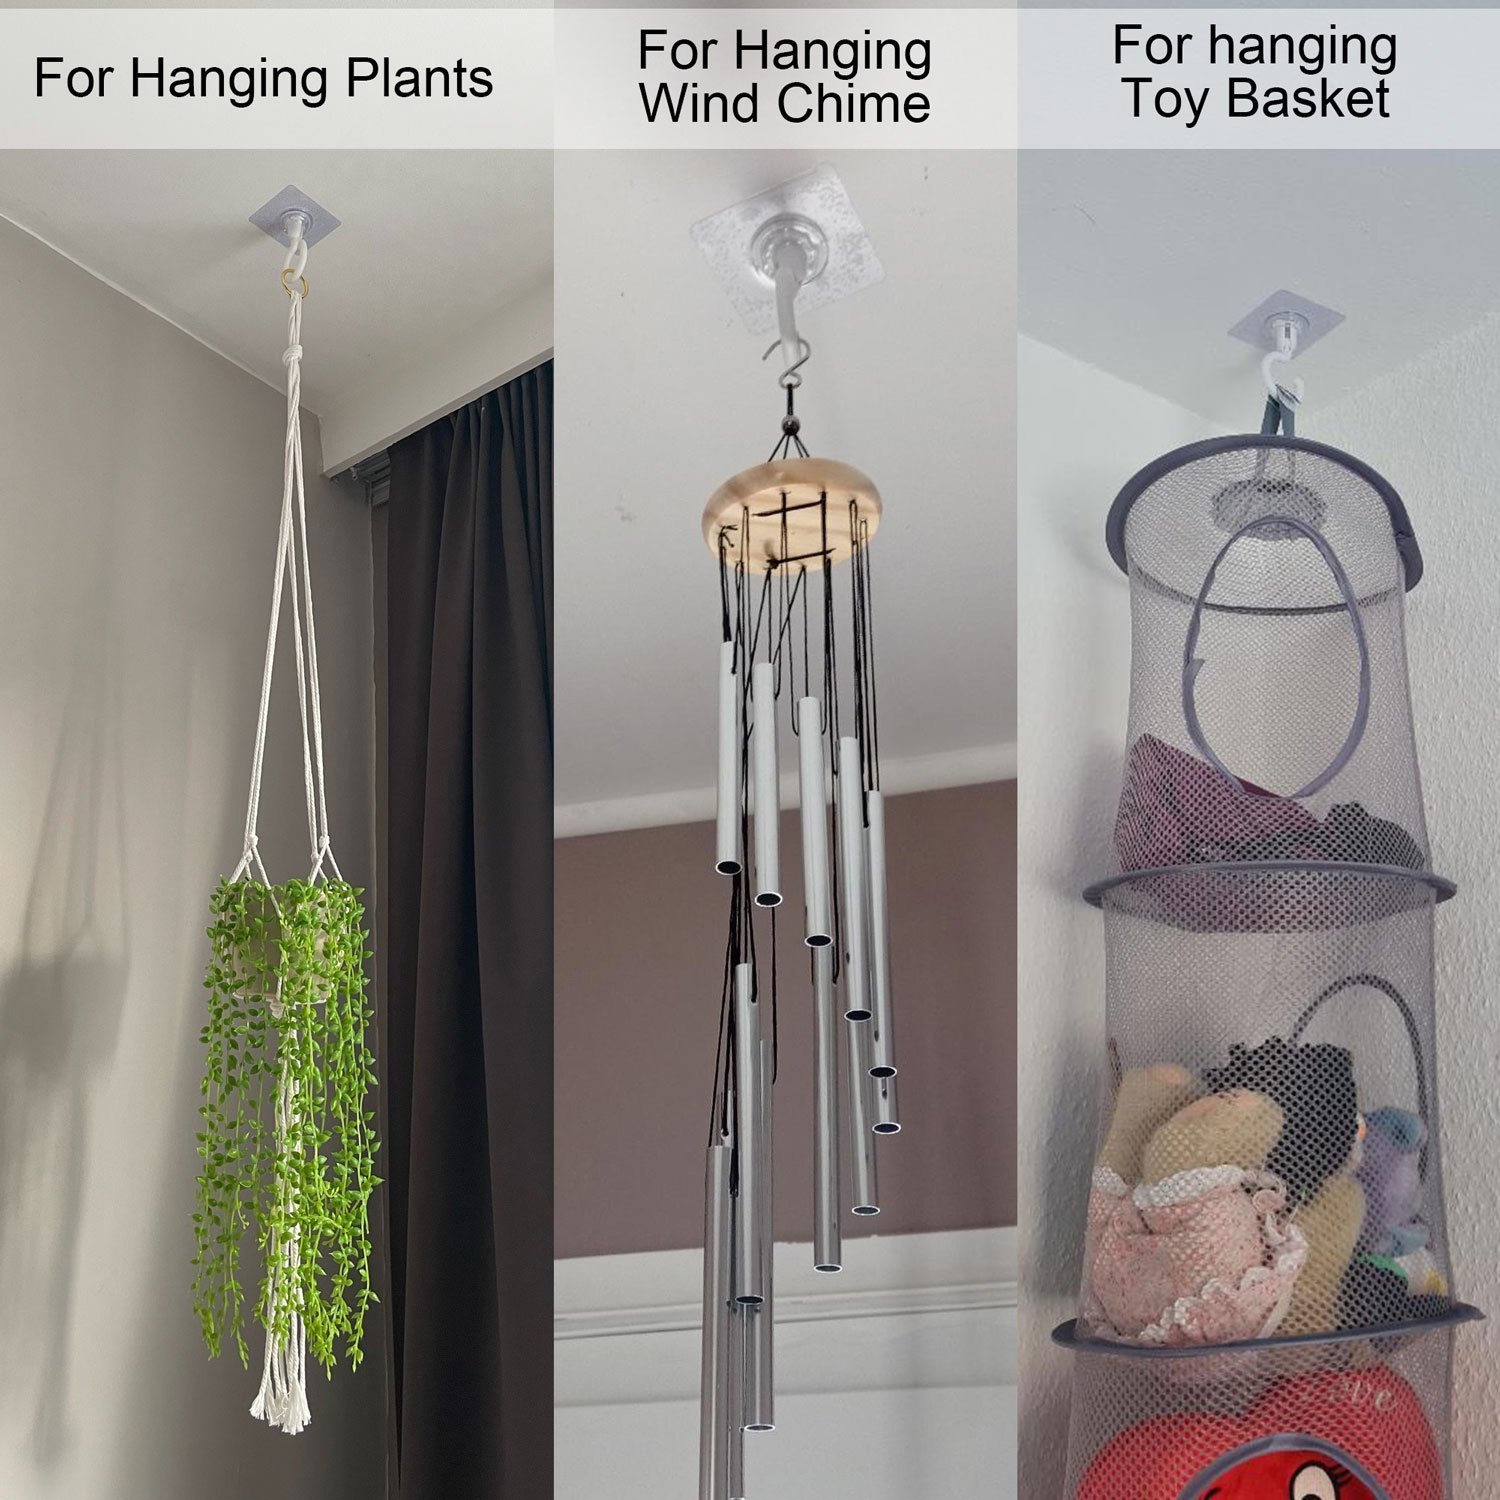 10pcs Adhesive Ceiling Hooks For Hanging Clothes Mobile Curtain